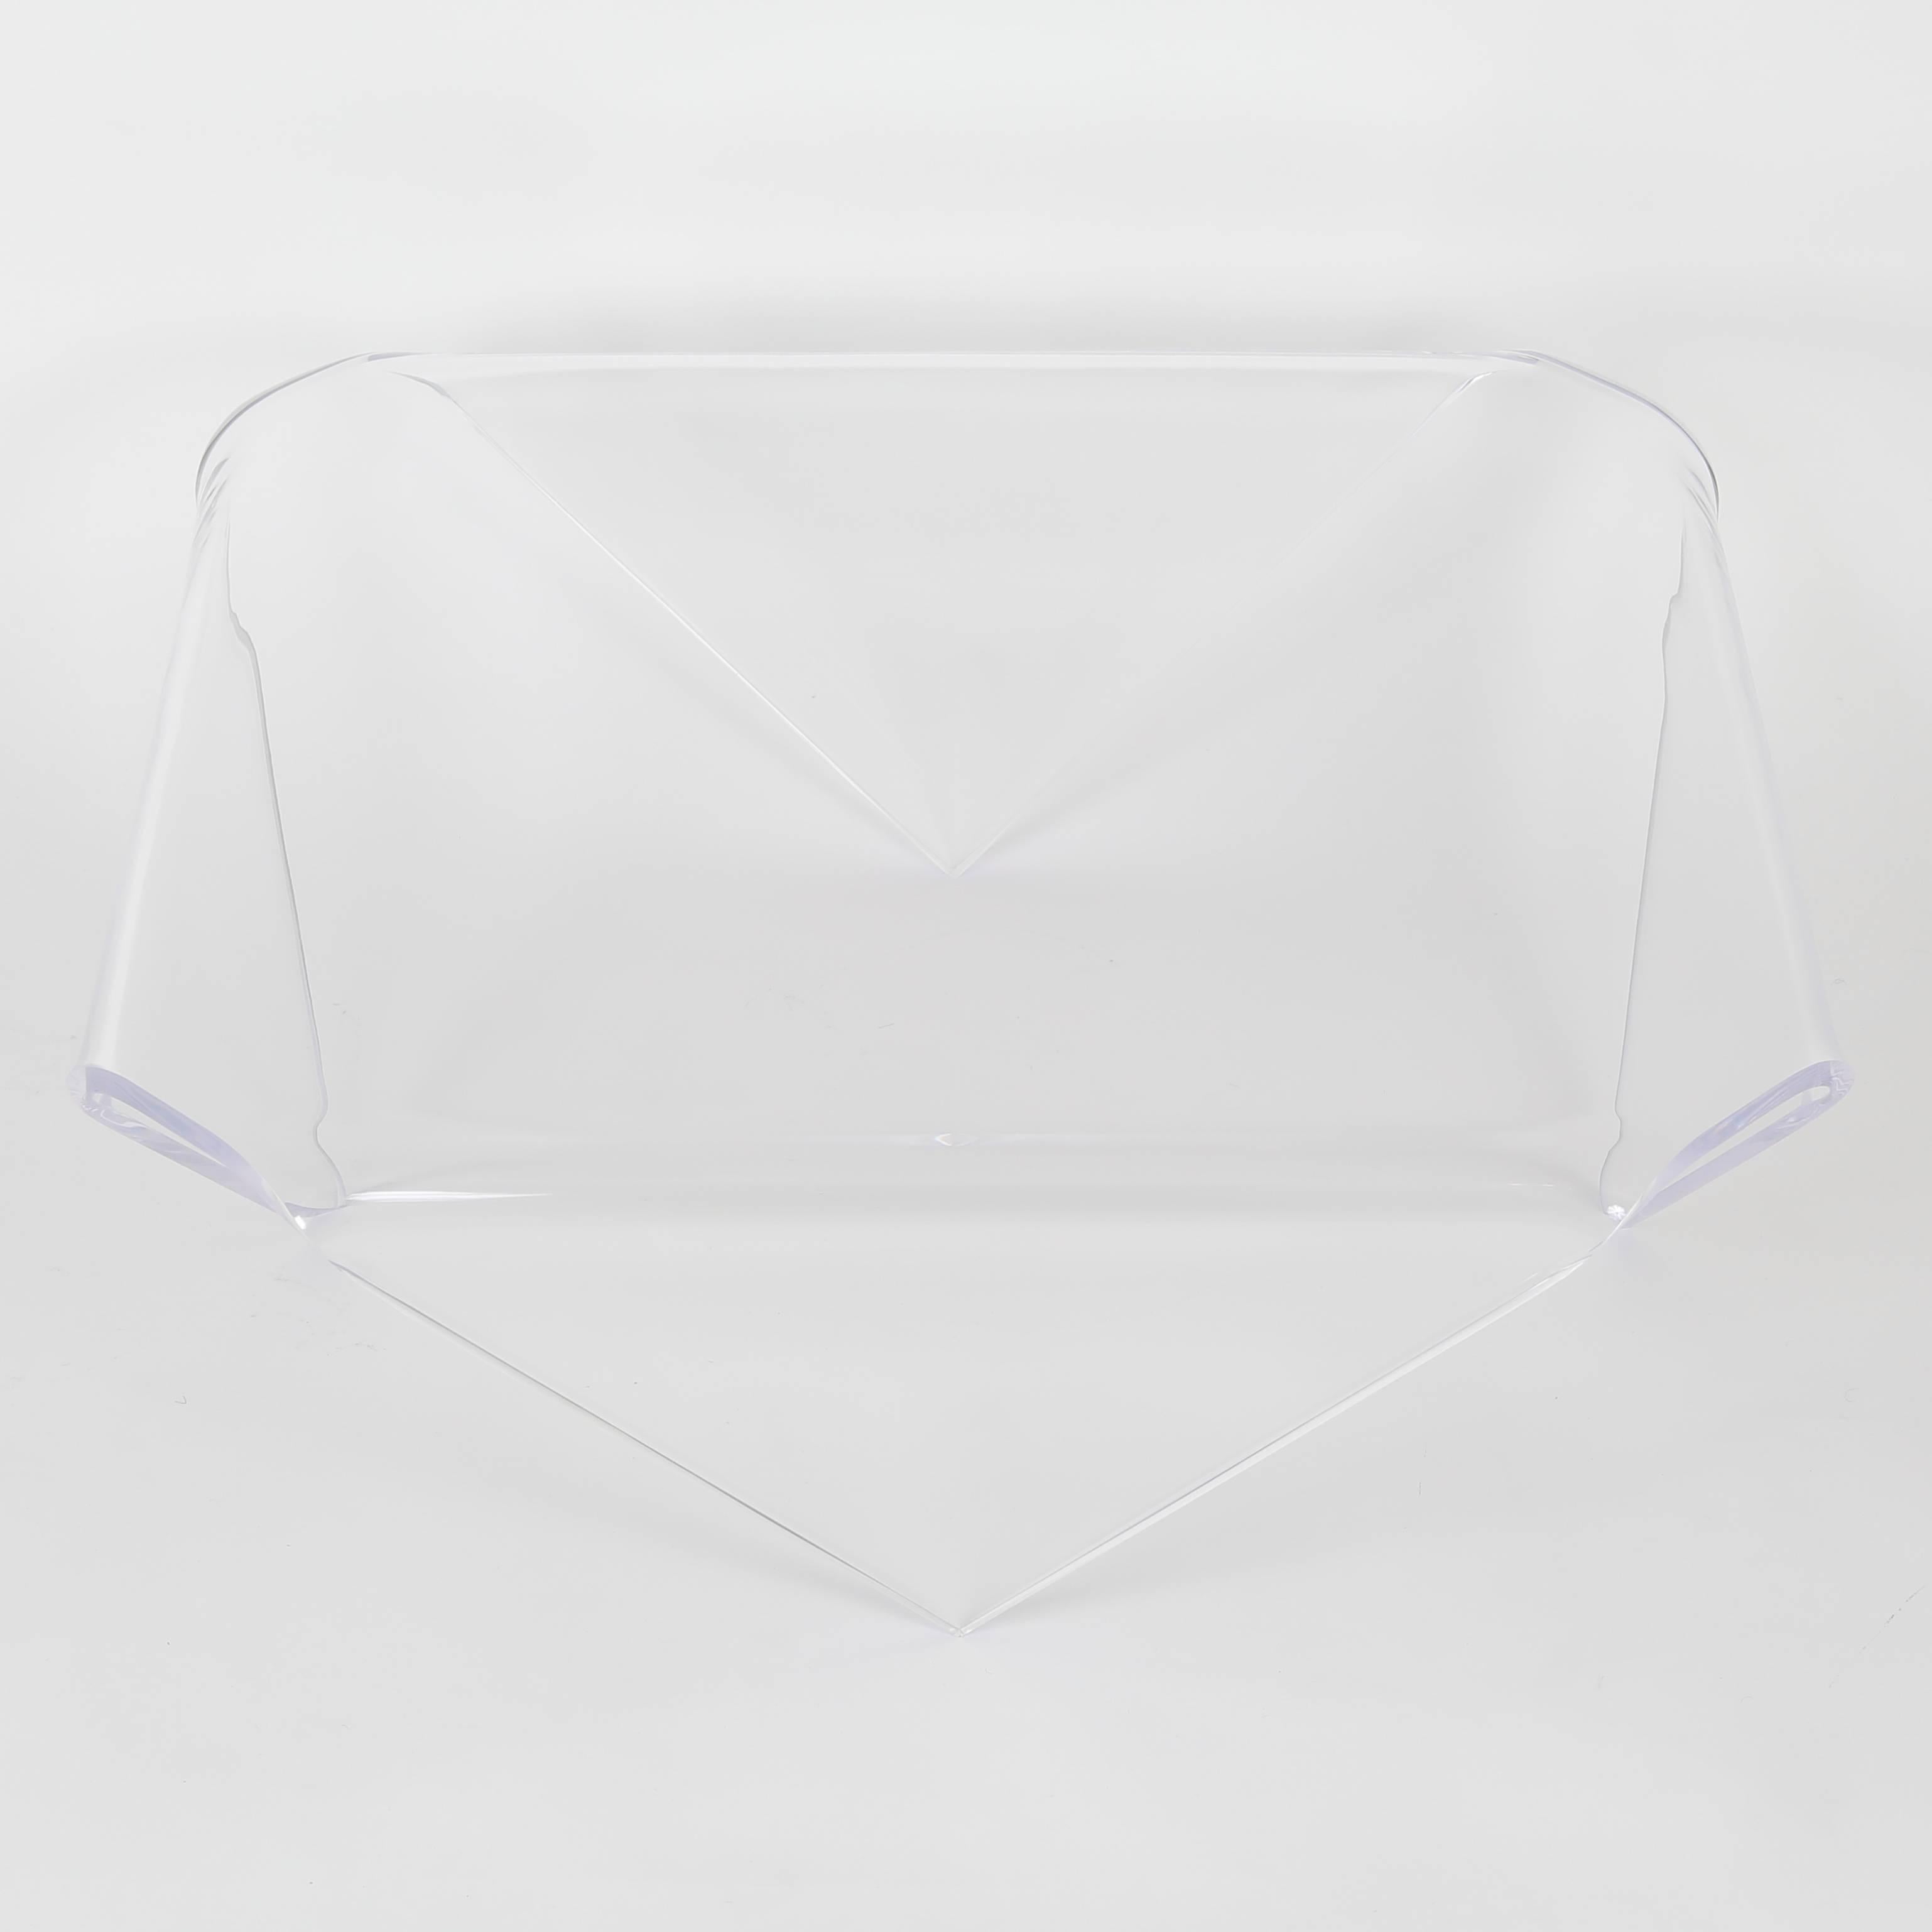 This substantial and elegant coffee table has been fabricated from a single sheet of 3/4-inch-thick clear acrylic, each corner precisely folded to form four inset triangular legs. This clear example is available for immediate purchase, or the table